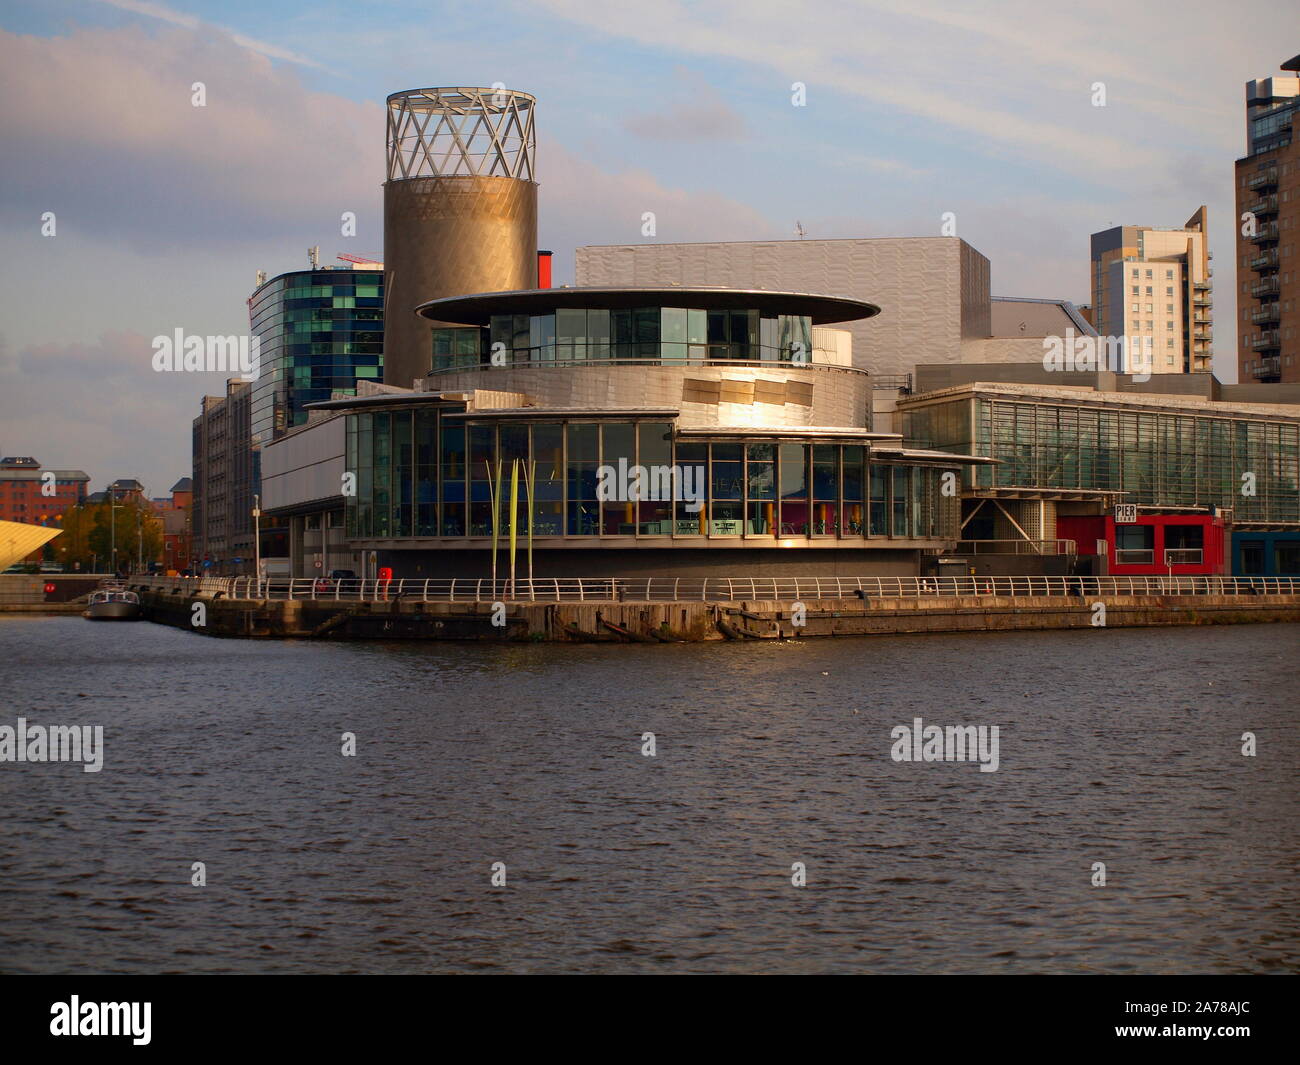 The quays theatre, salford quays, media city, walford, Manchester. Stock Photo